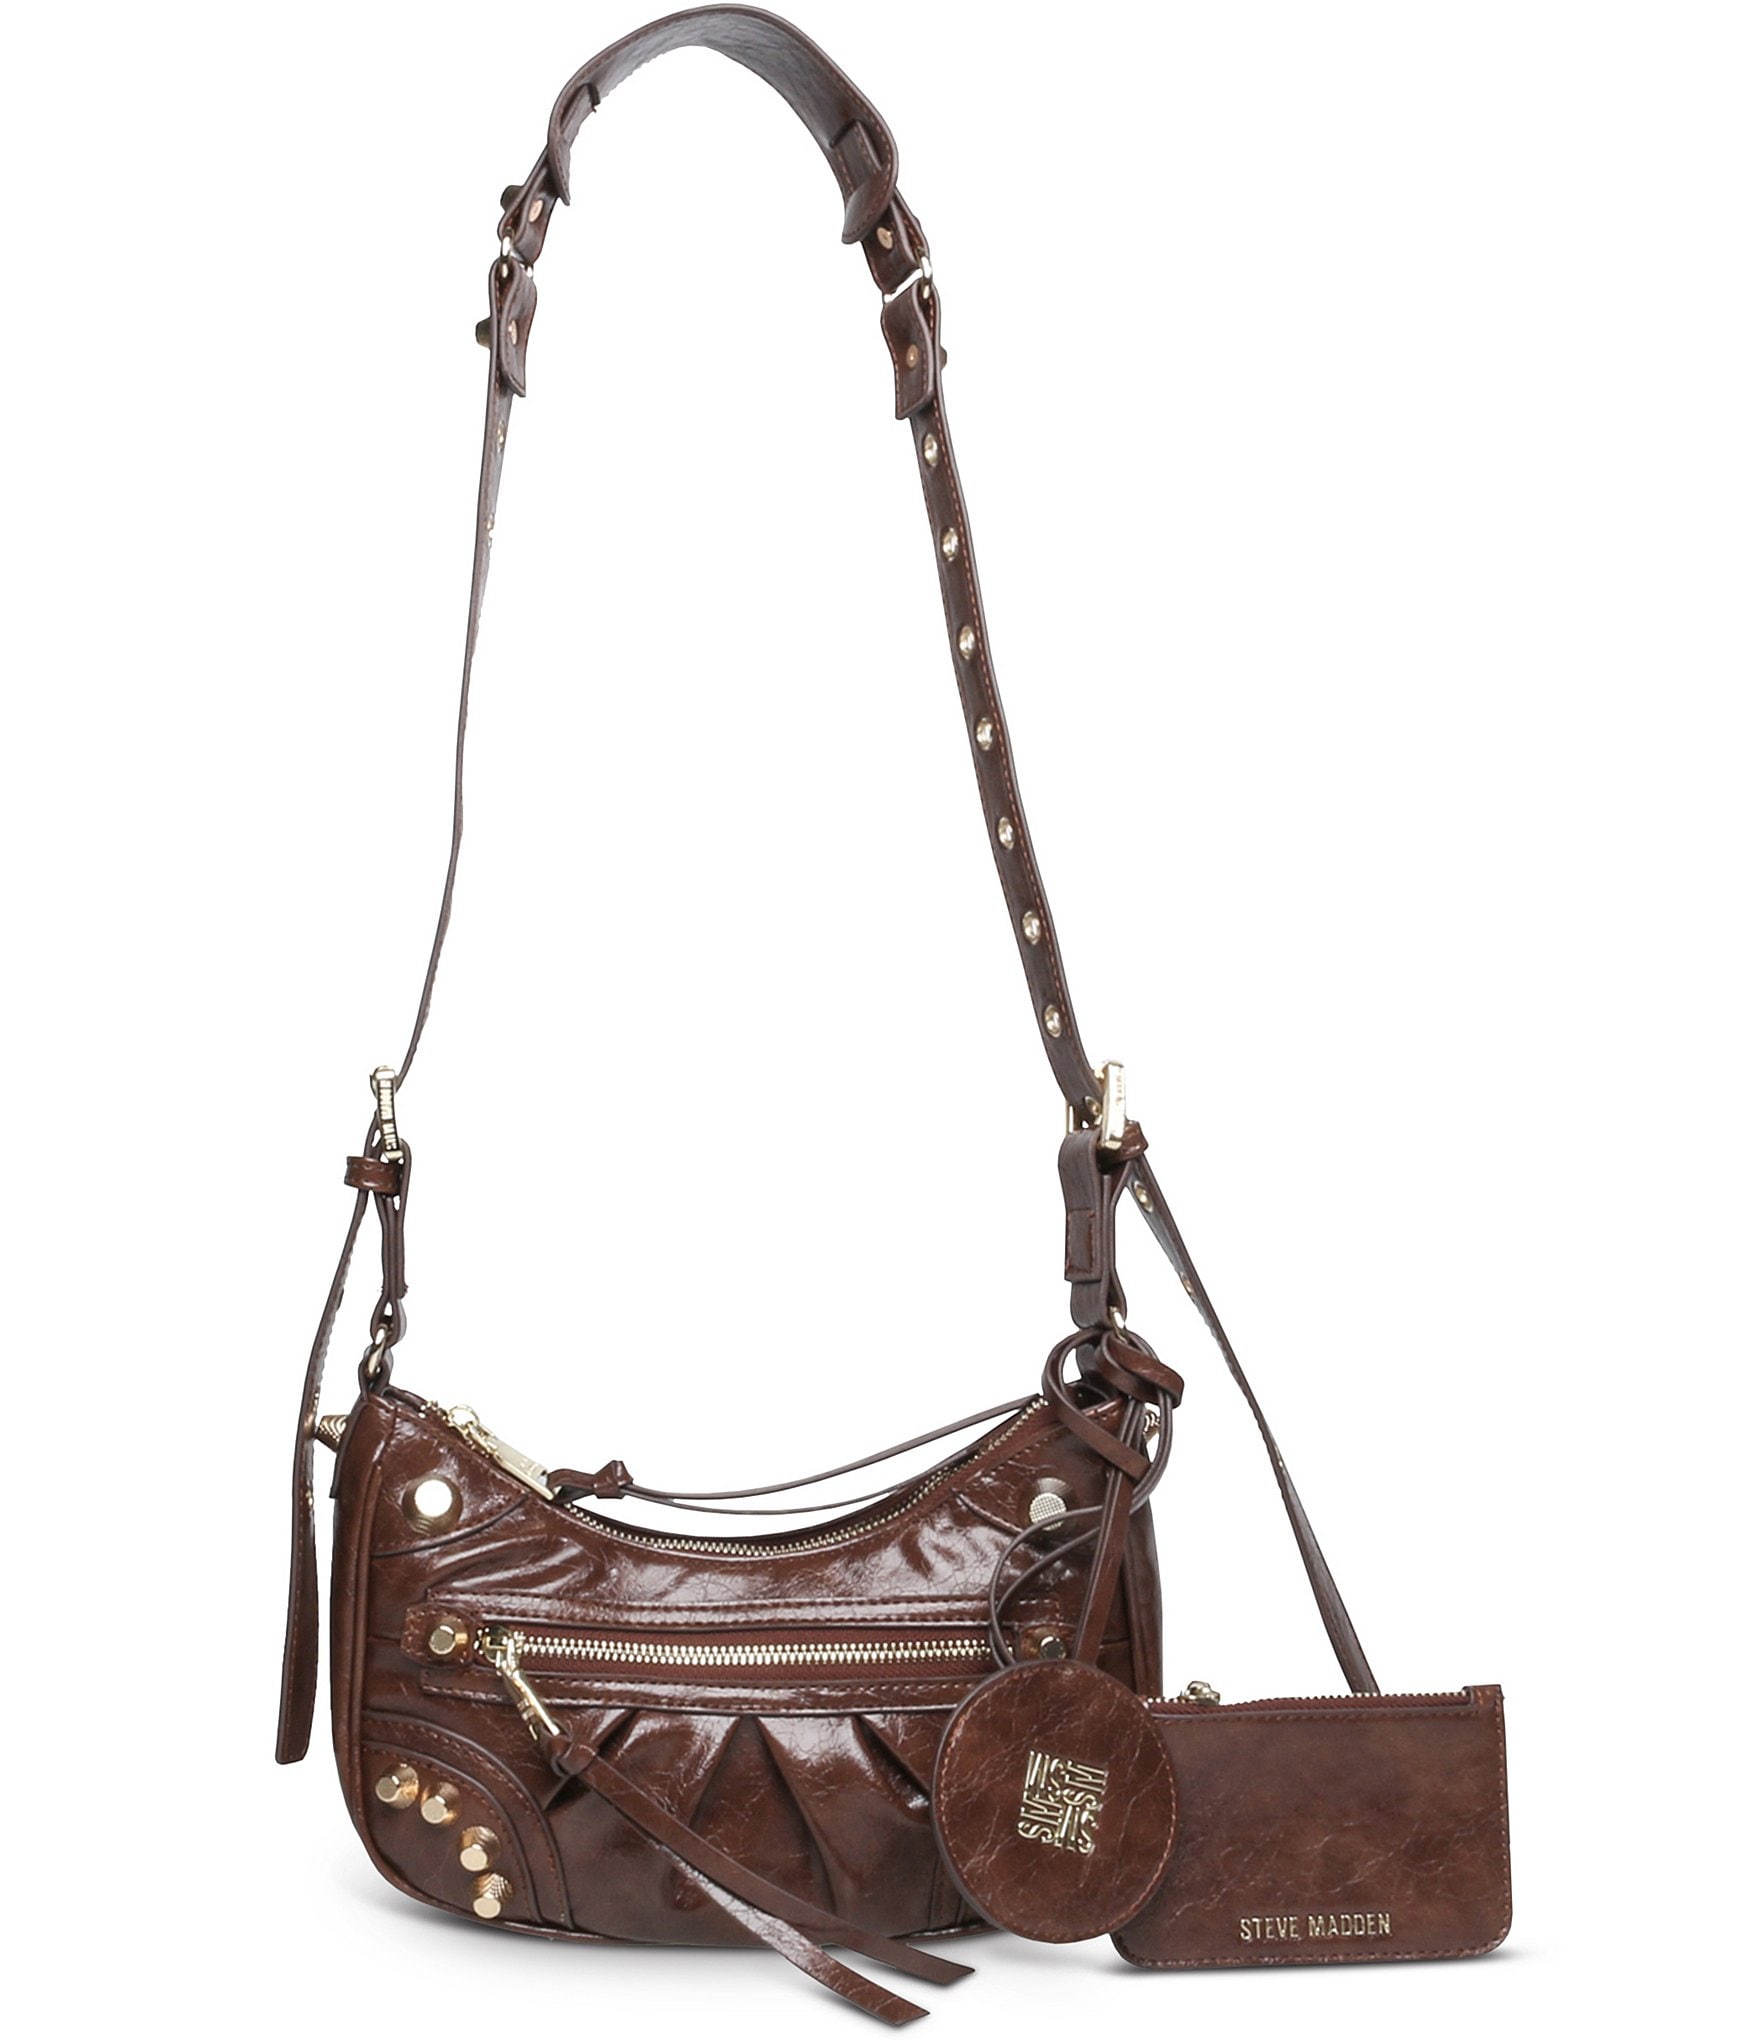 Steve Madden Bglowing crossbody bag in chocolate brown - ShopStyle